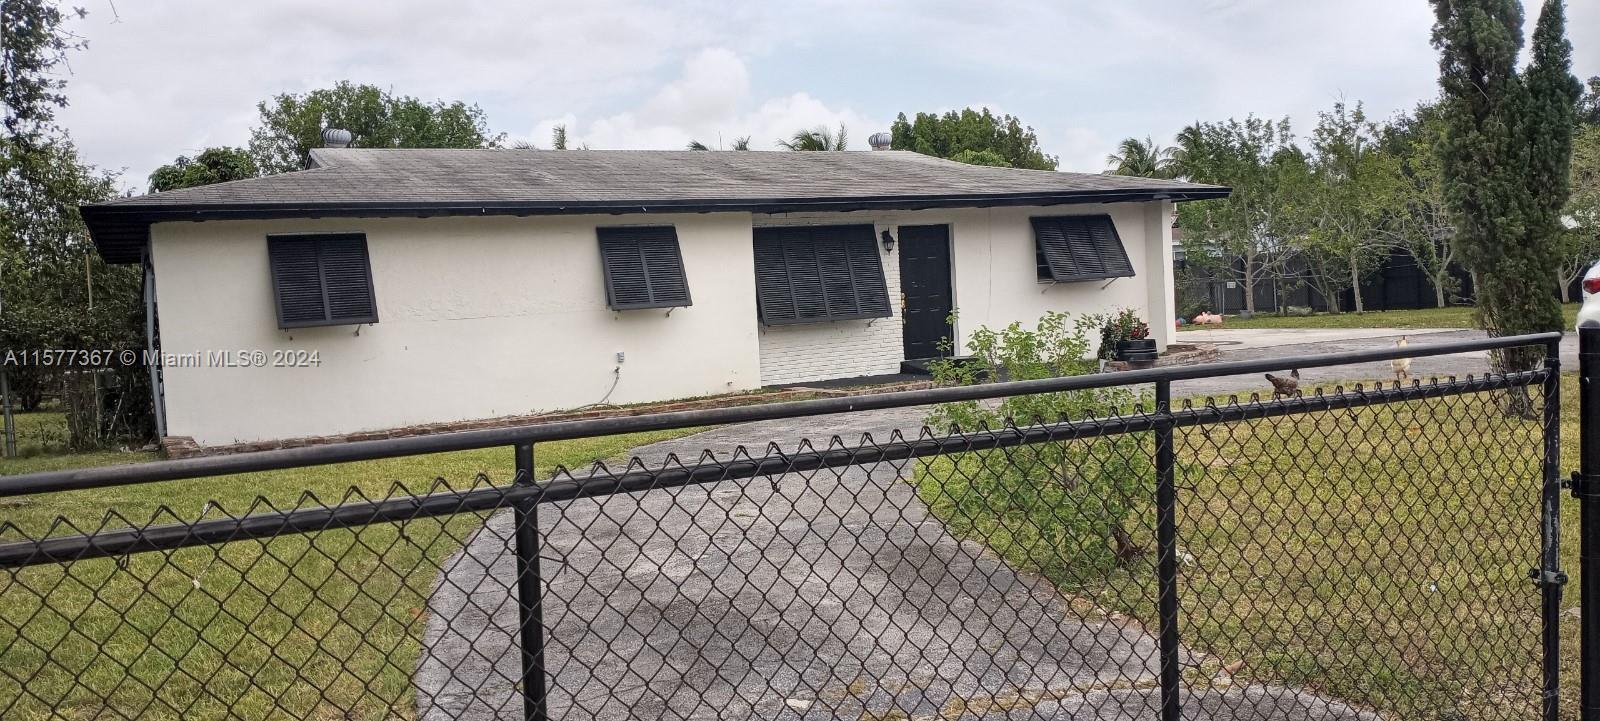 Photo of 1165 NW 15th St in Homestead, FL